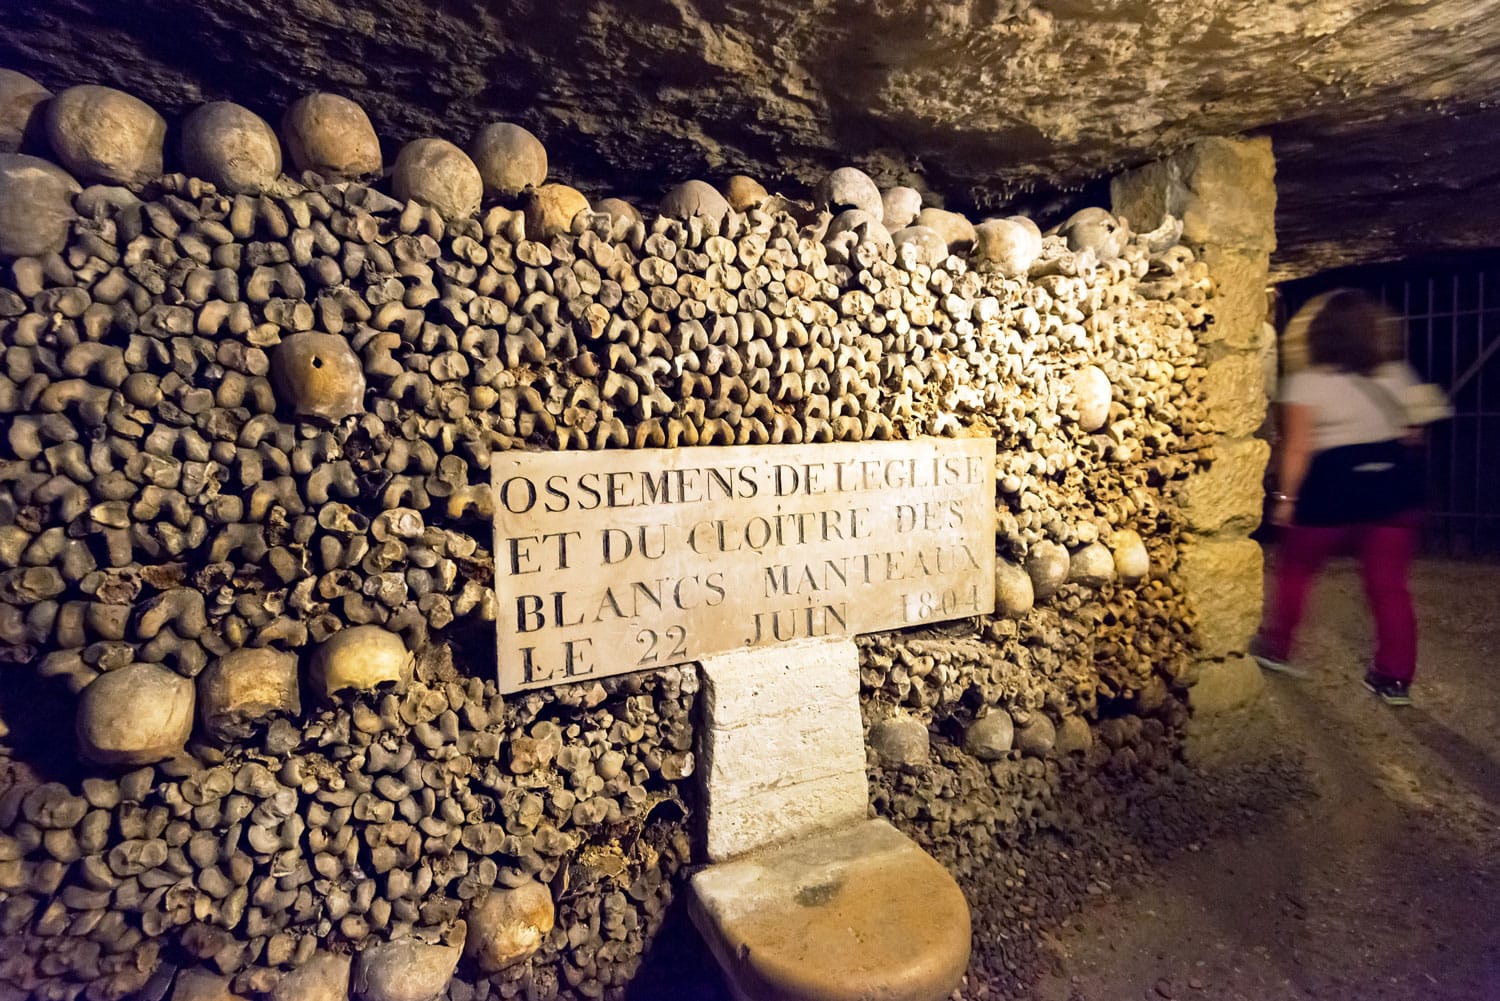 The Catacombs of Paris, France